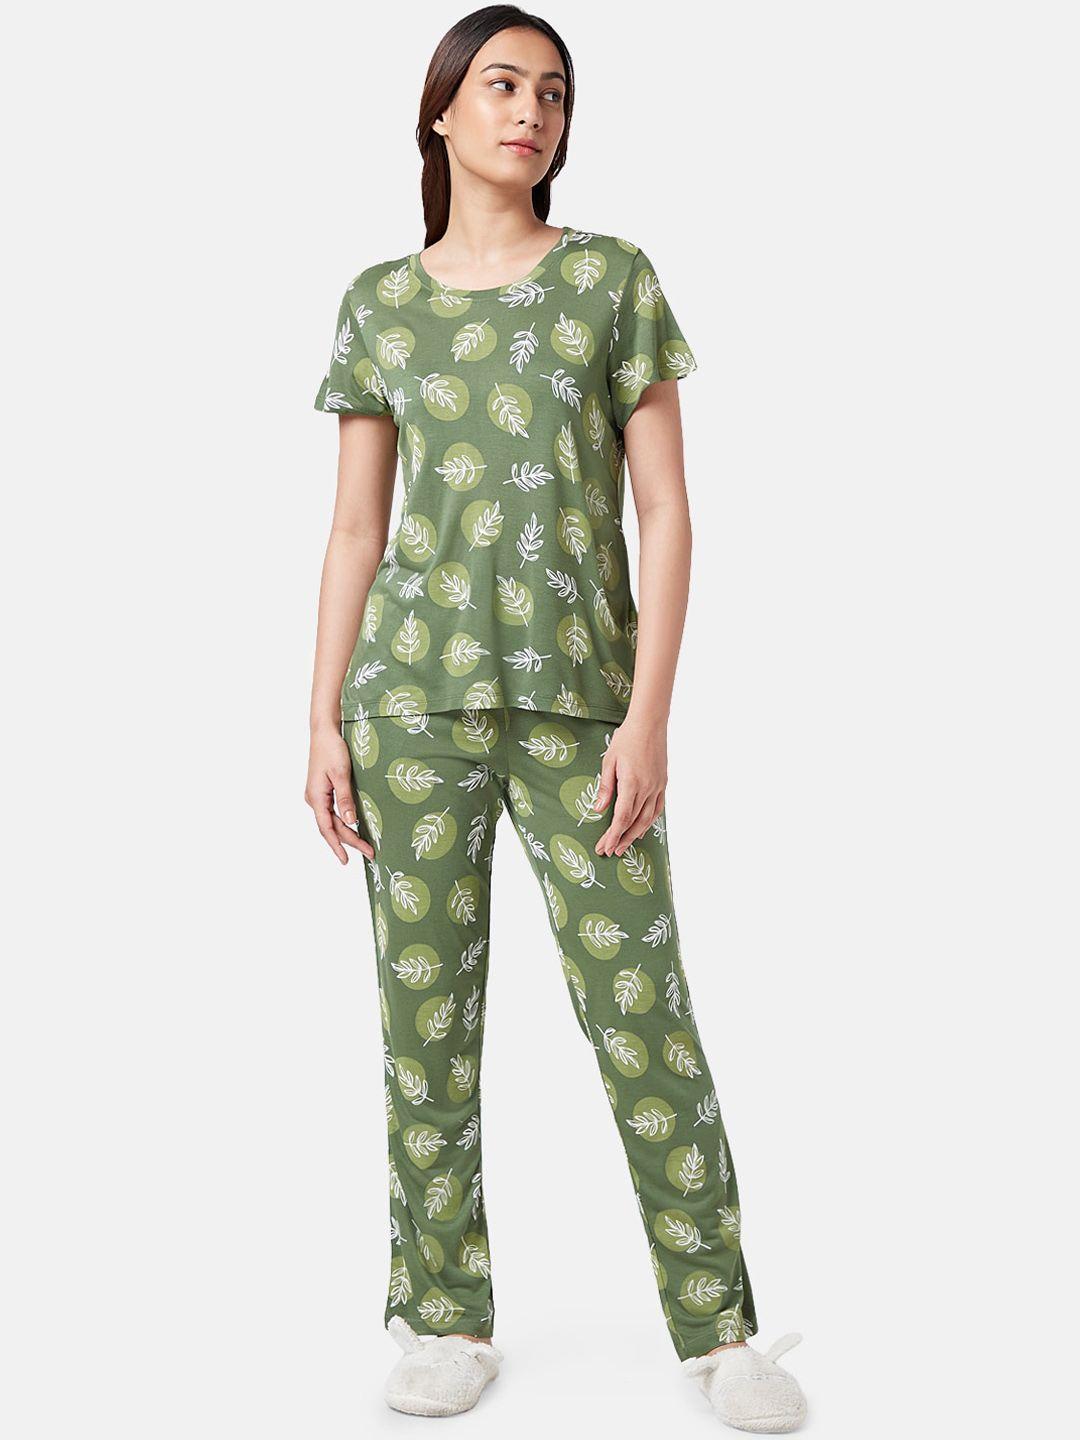 Dreamz by Pantaloons Floral Printed Night Suit